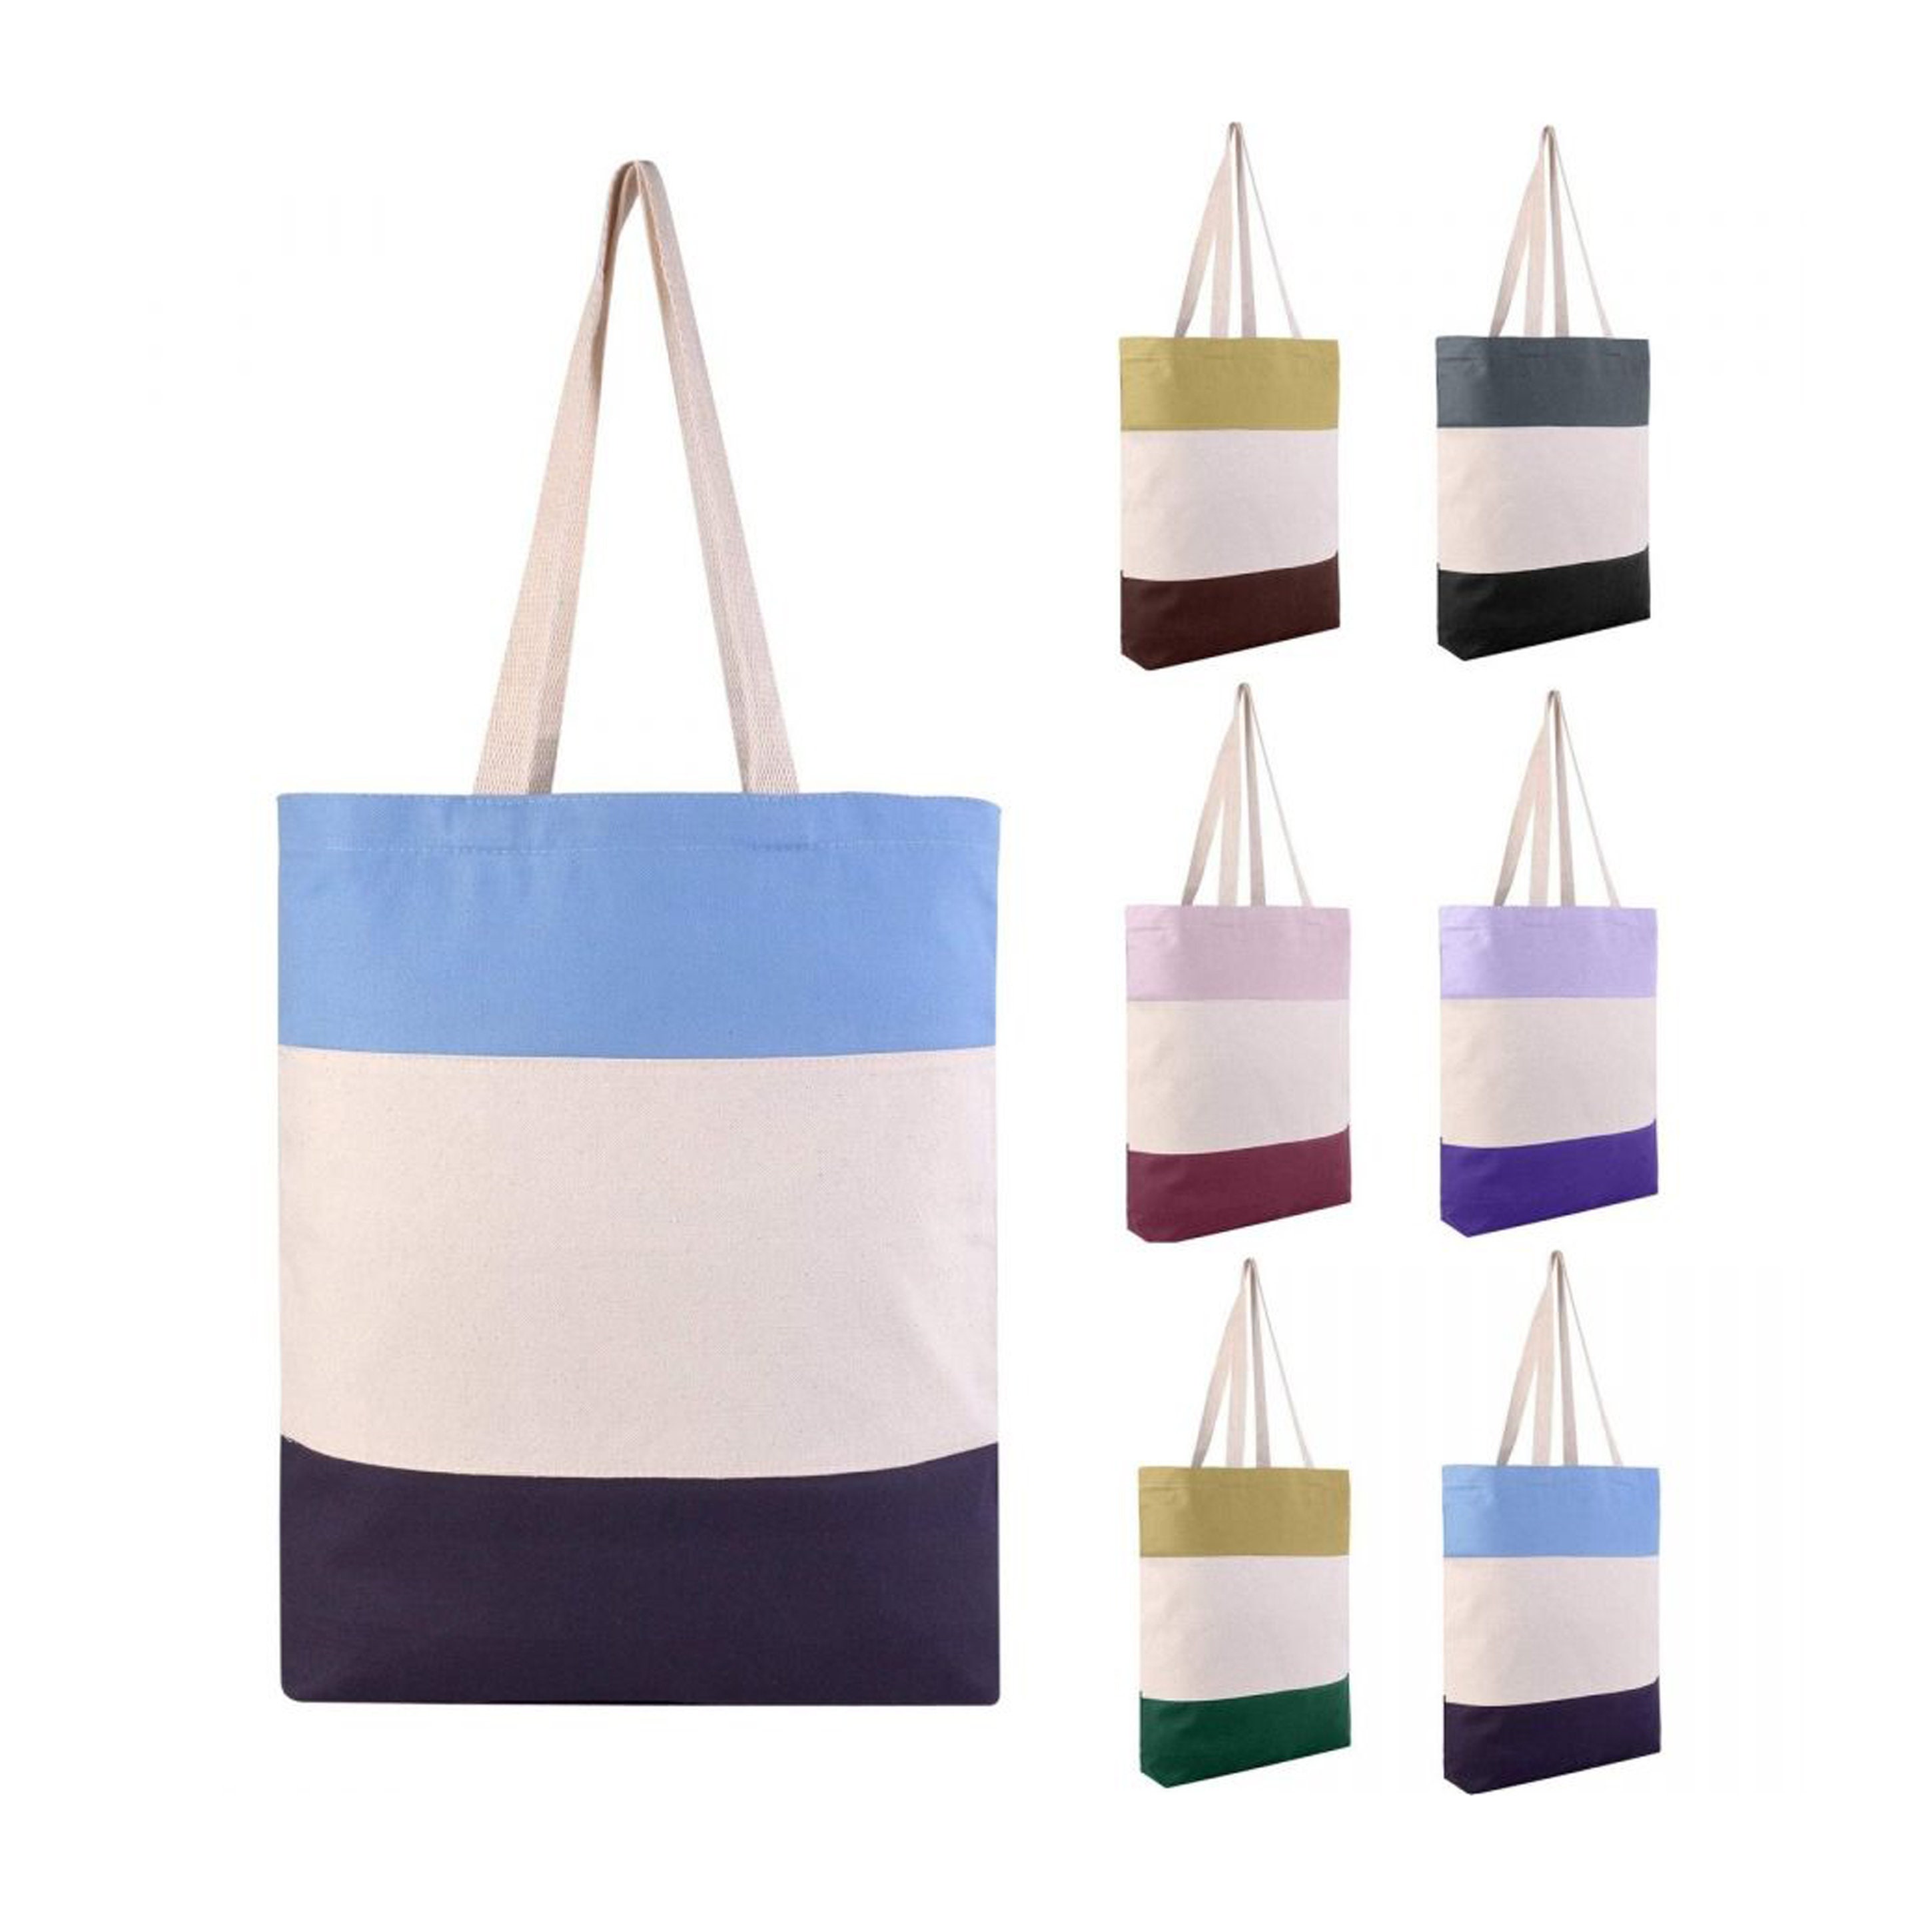 Canvas Tote Bags Wholesale Blank Cotton Canvas Totes in Bulk 14x15x4 Sturdy  High Quality Reusable Bags 